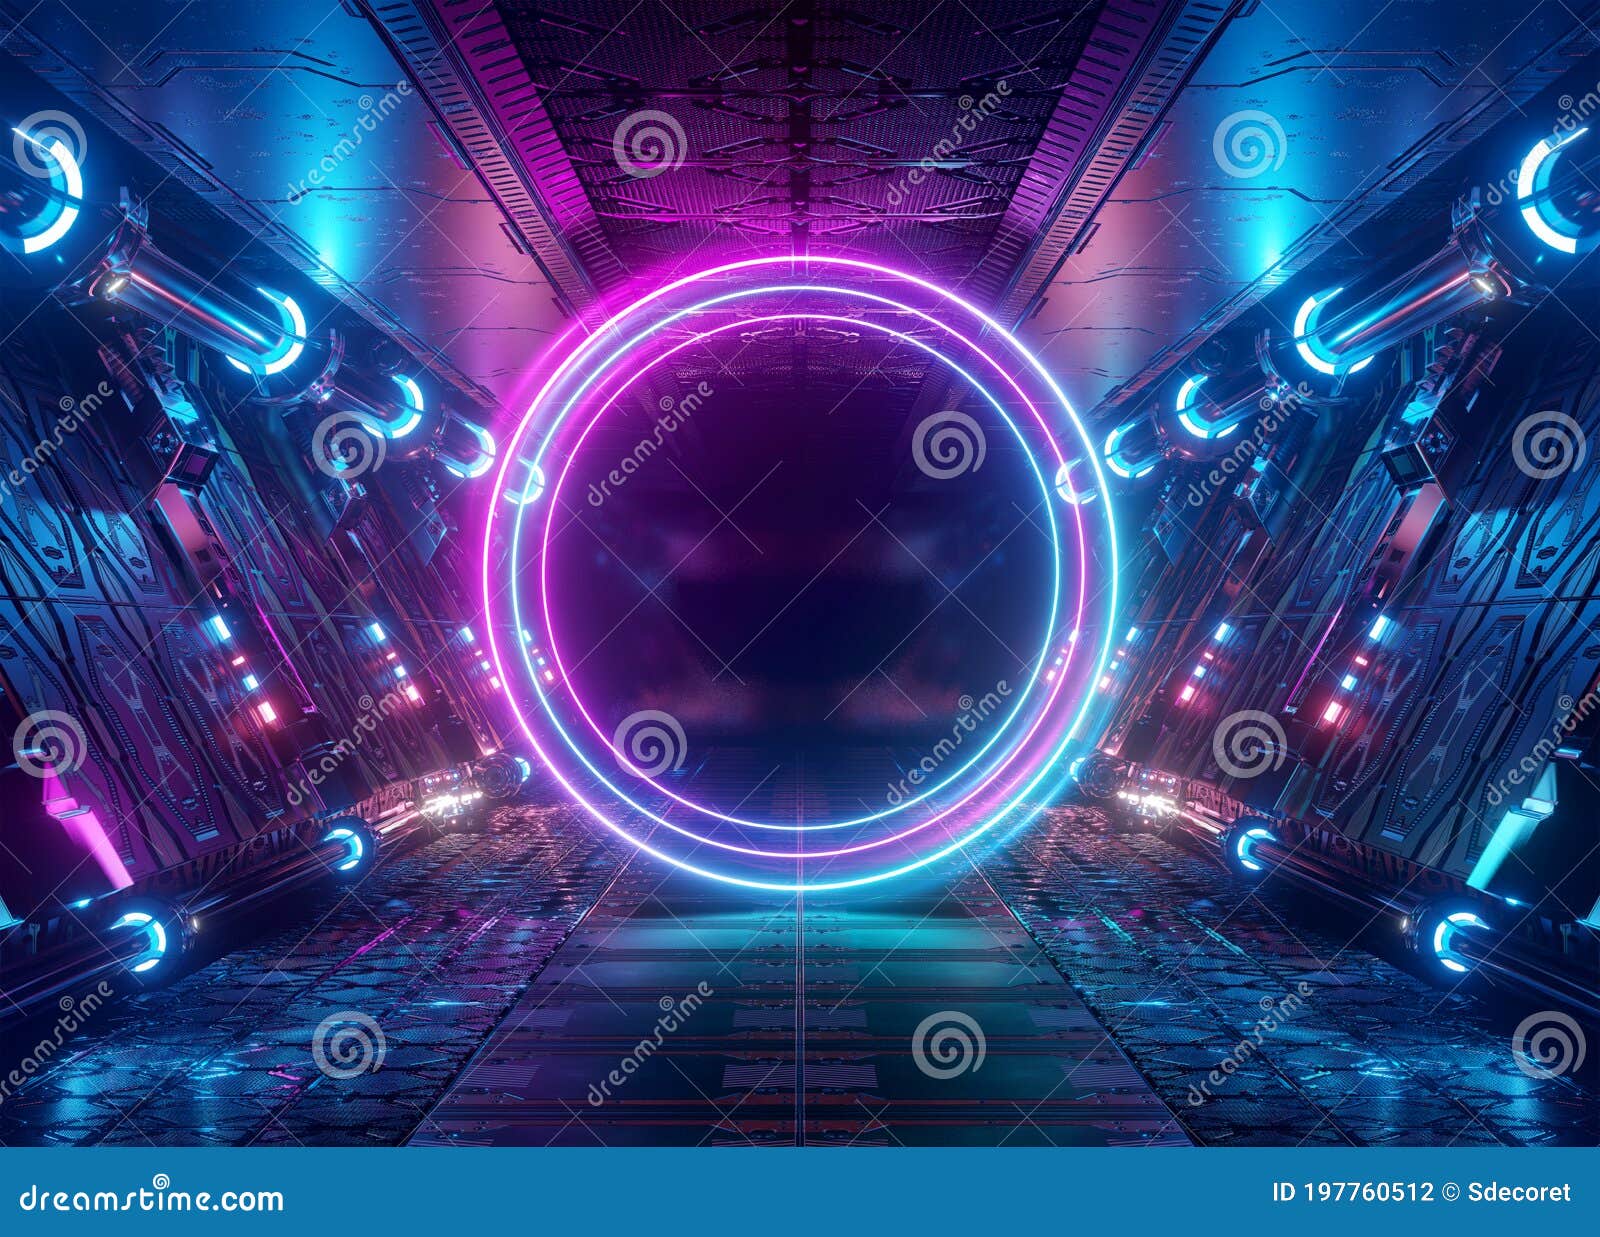 Download Neon Style Circle Mockup In Spaceship. Blue And Pink ...